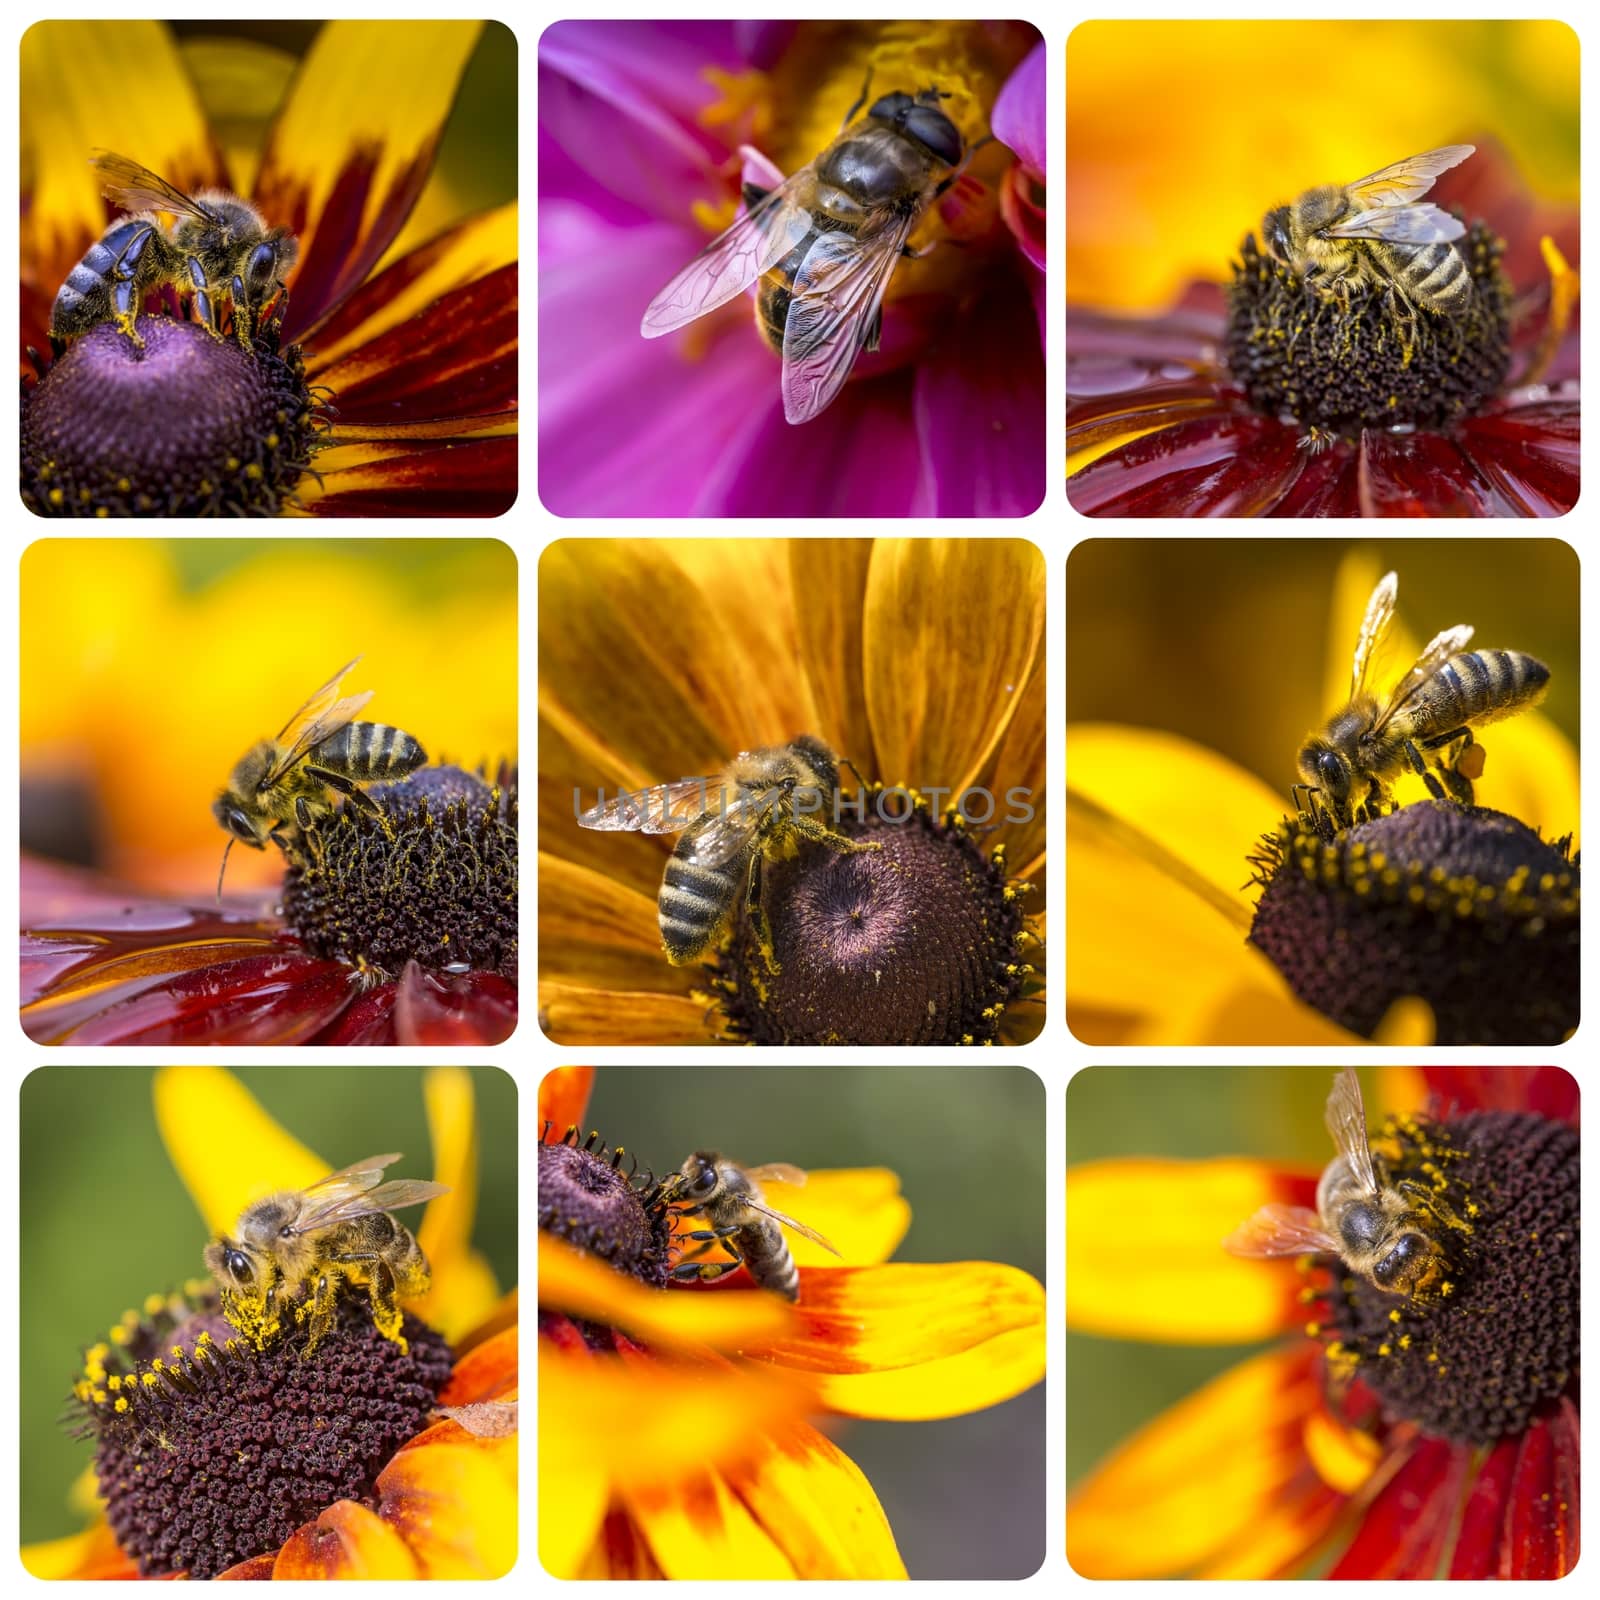 Collage of Western Honey Bee images - travel background (my photos)